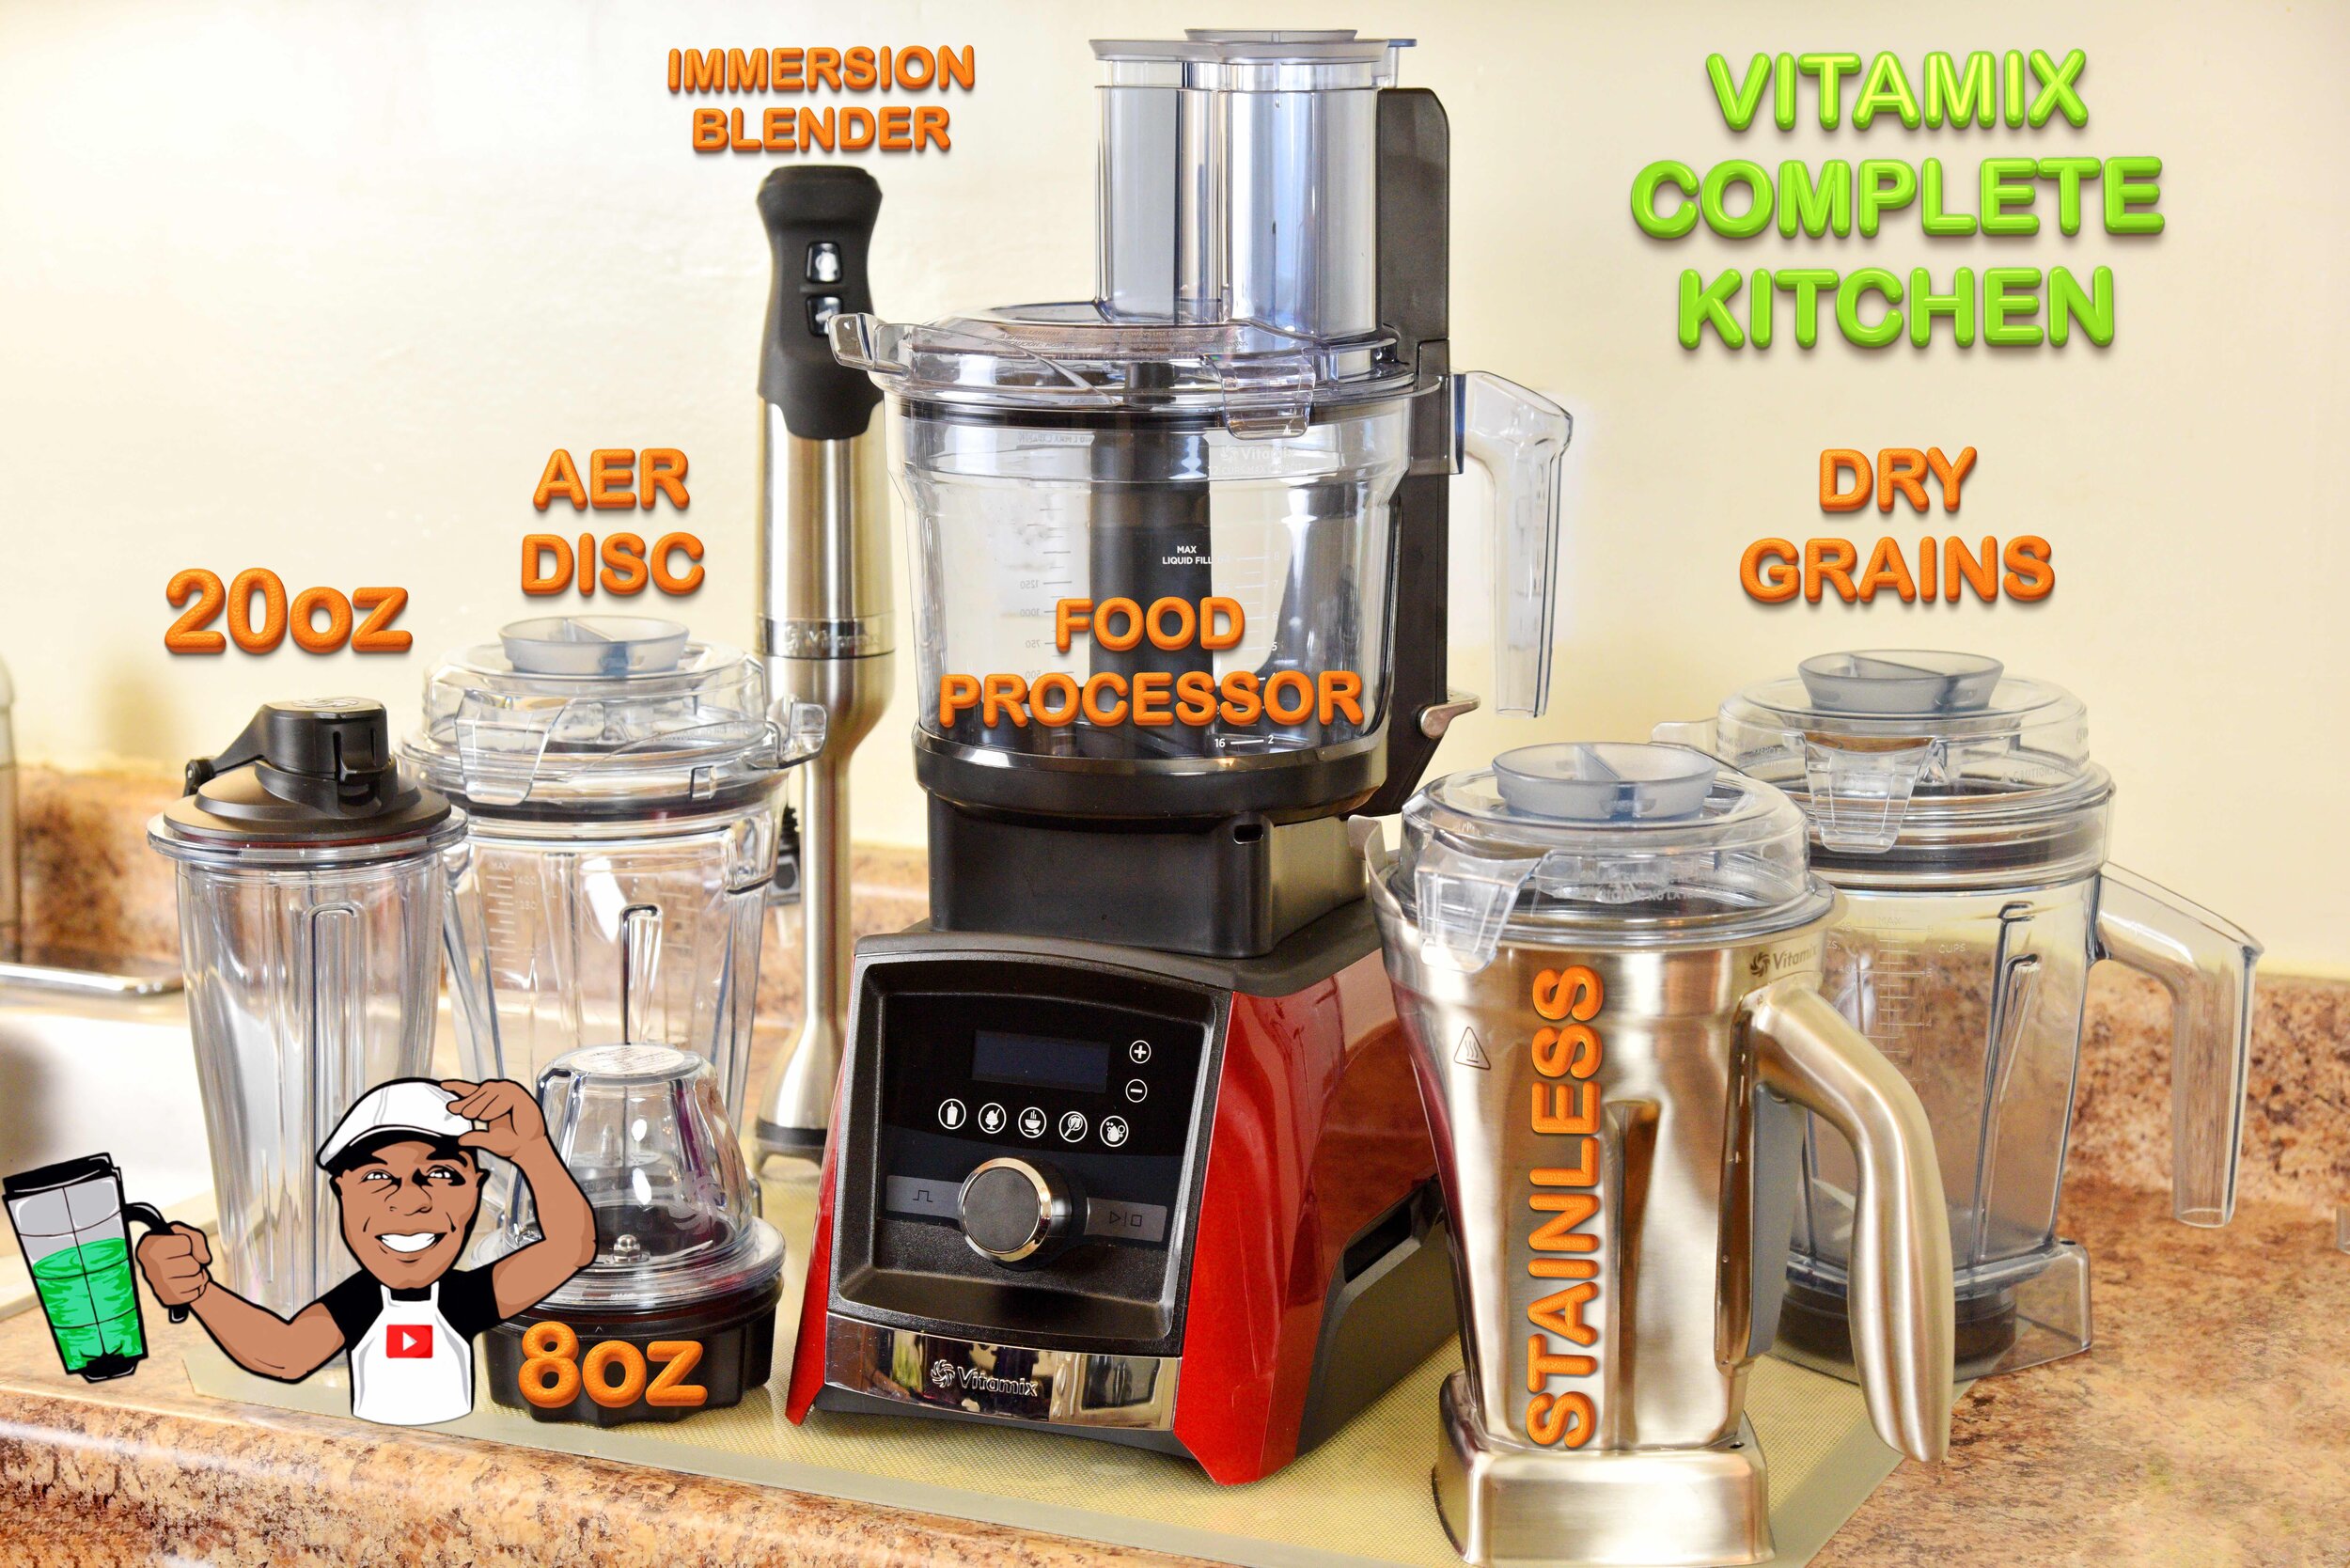 My Vitamix Complete Kitchen. 10 Recipes. All Access! — Blending With Henry, Get original recipes, reviews and discounts off of premium Blenders